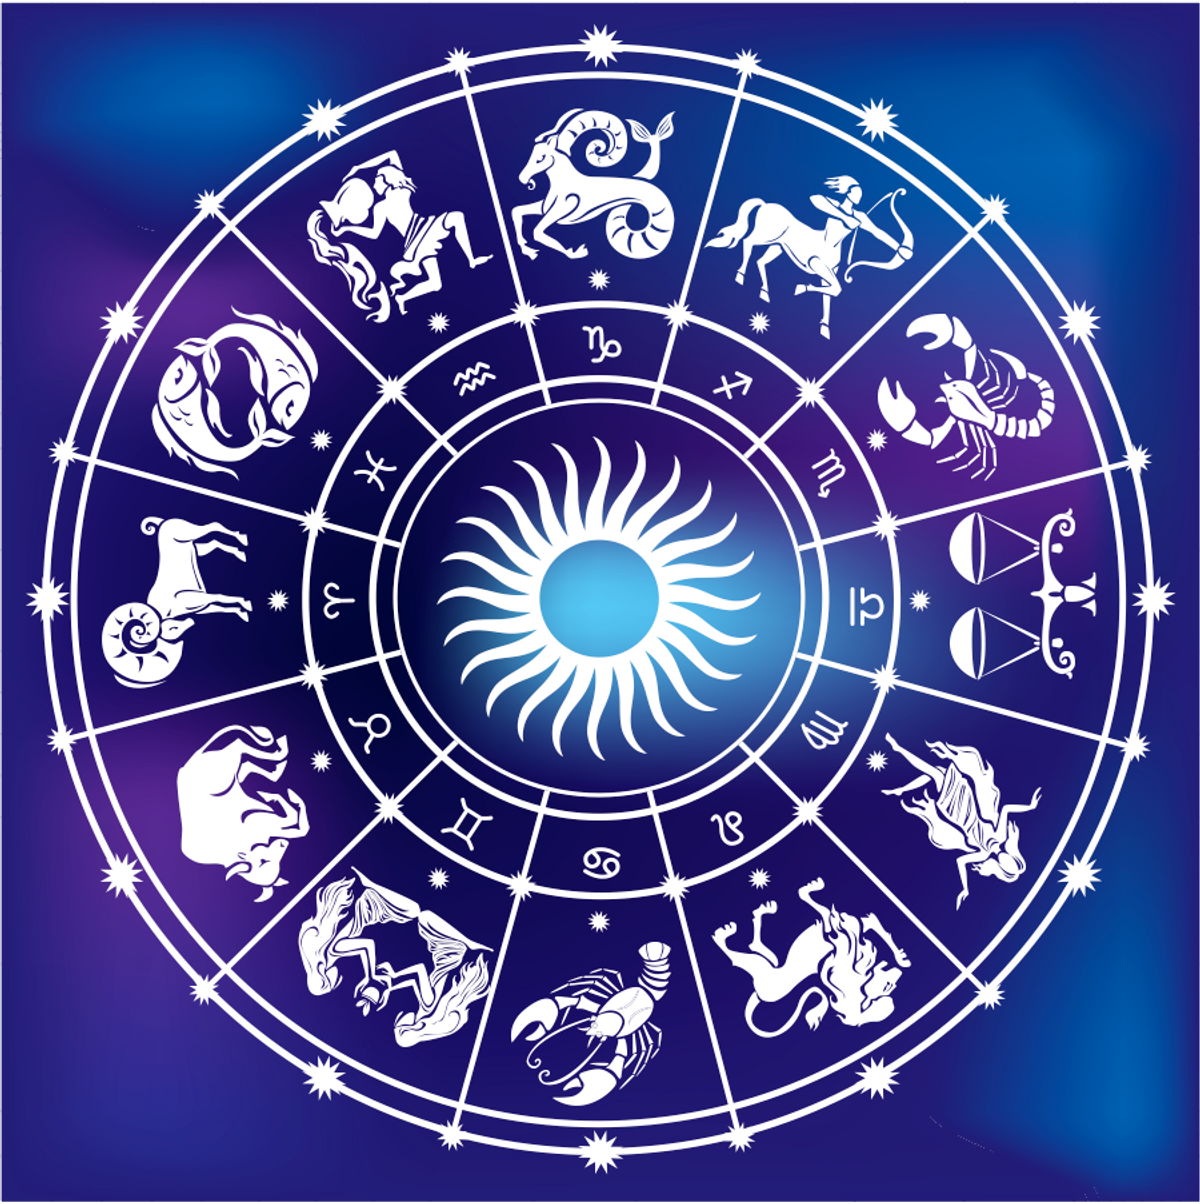 New Year's Resolutions Based On Your Zodiac Sign